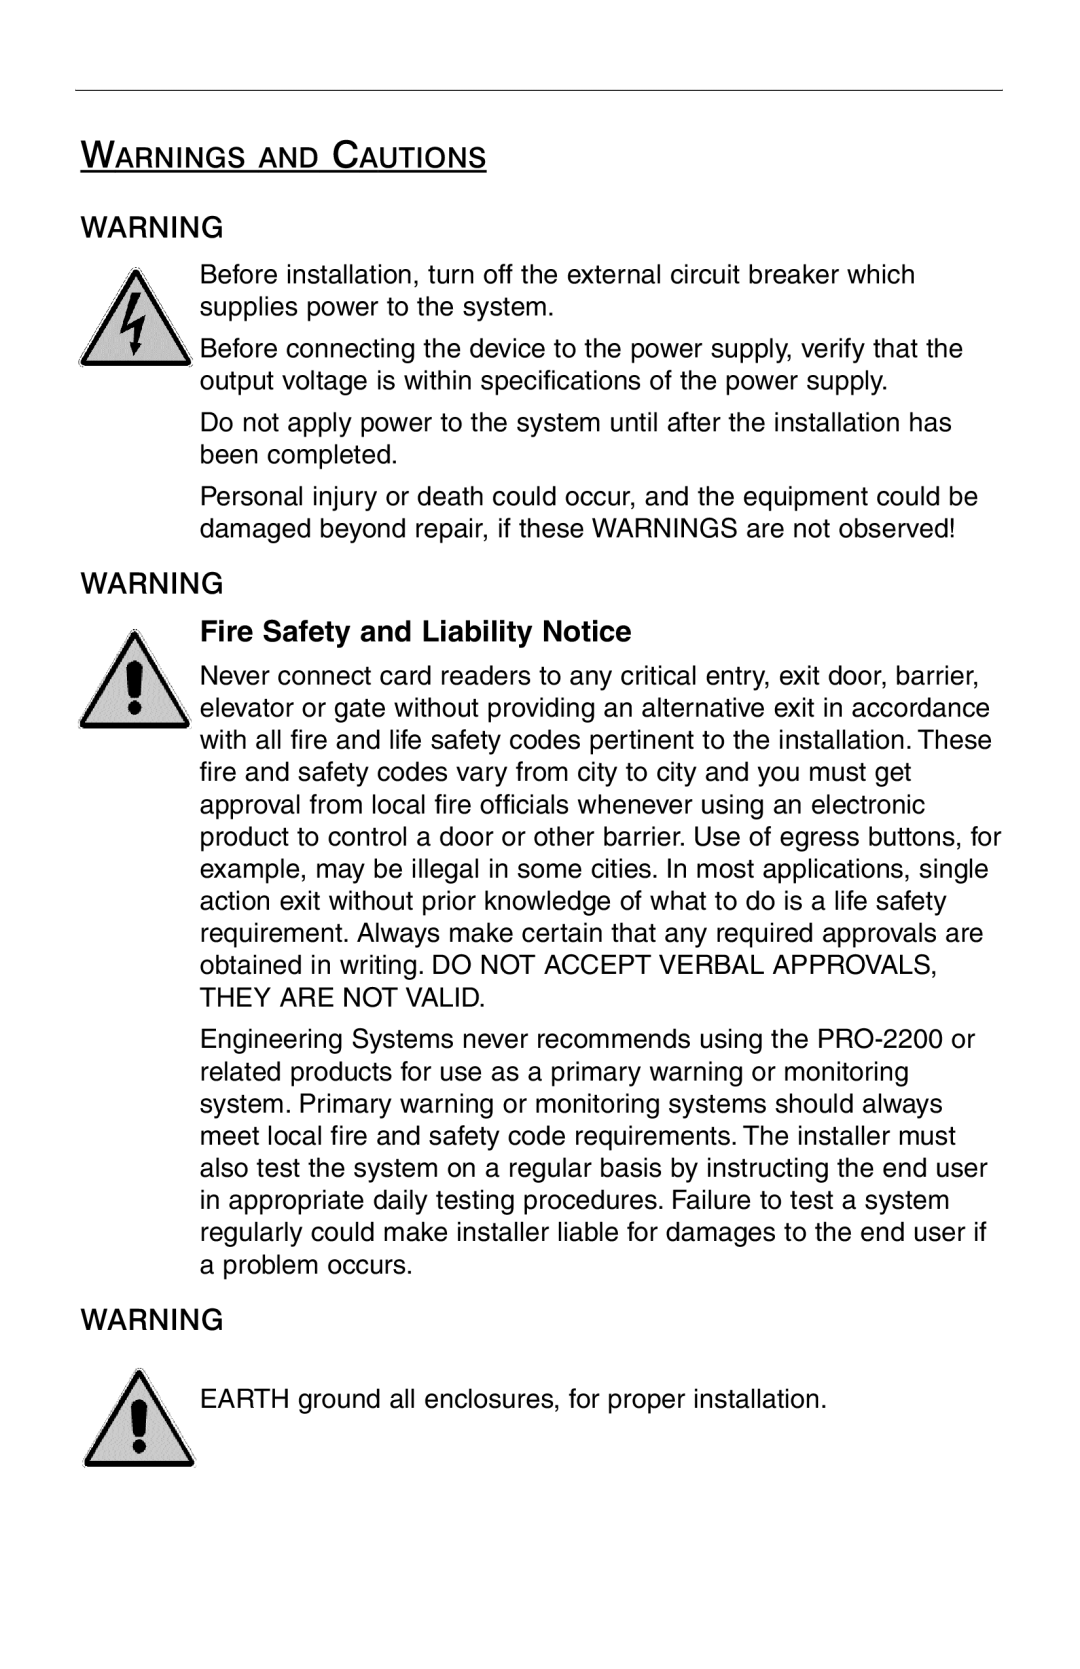 Honeywell PRO-2200 manual Warnings And Cautions, Fire Safety and Liability Notice 